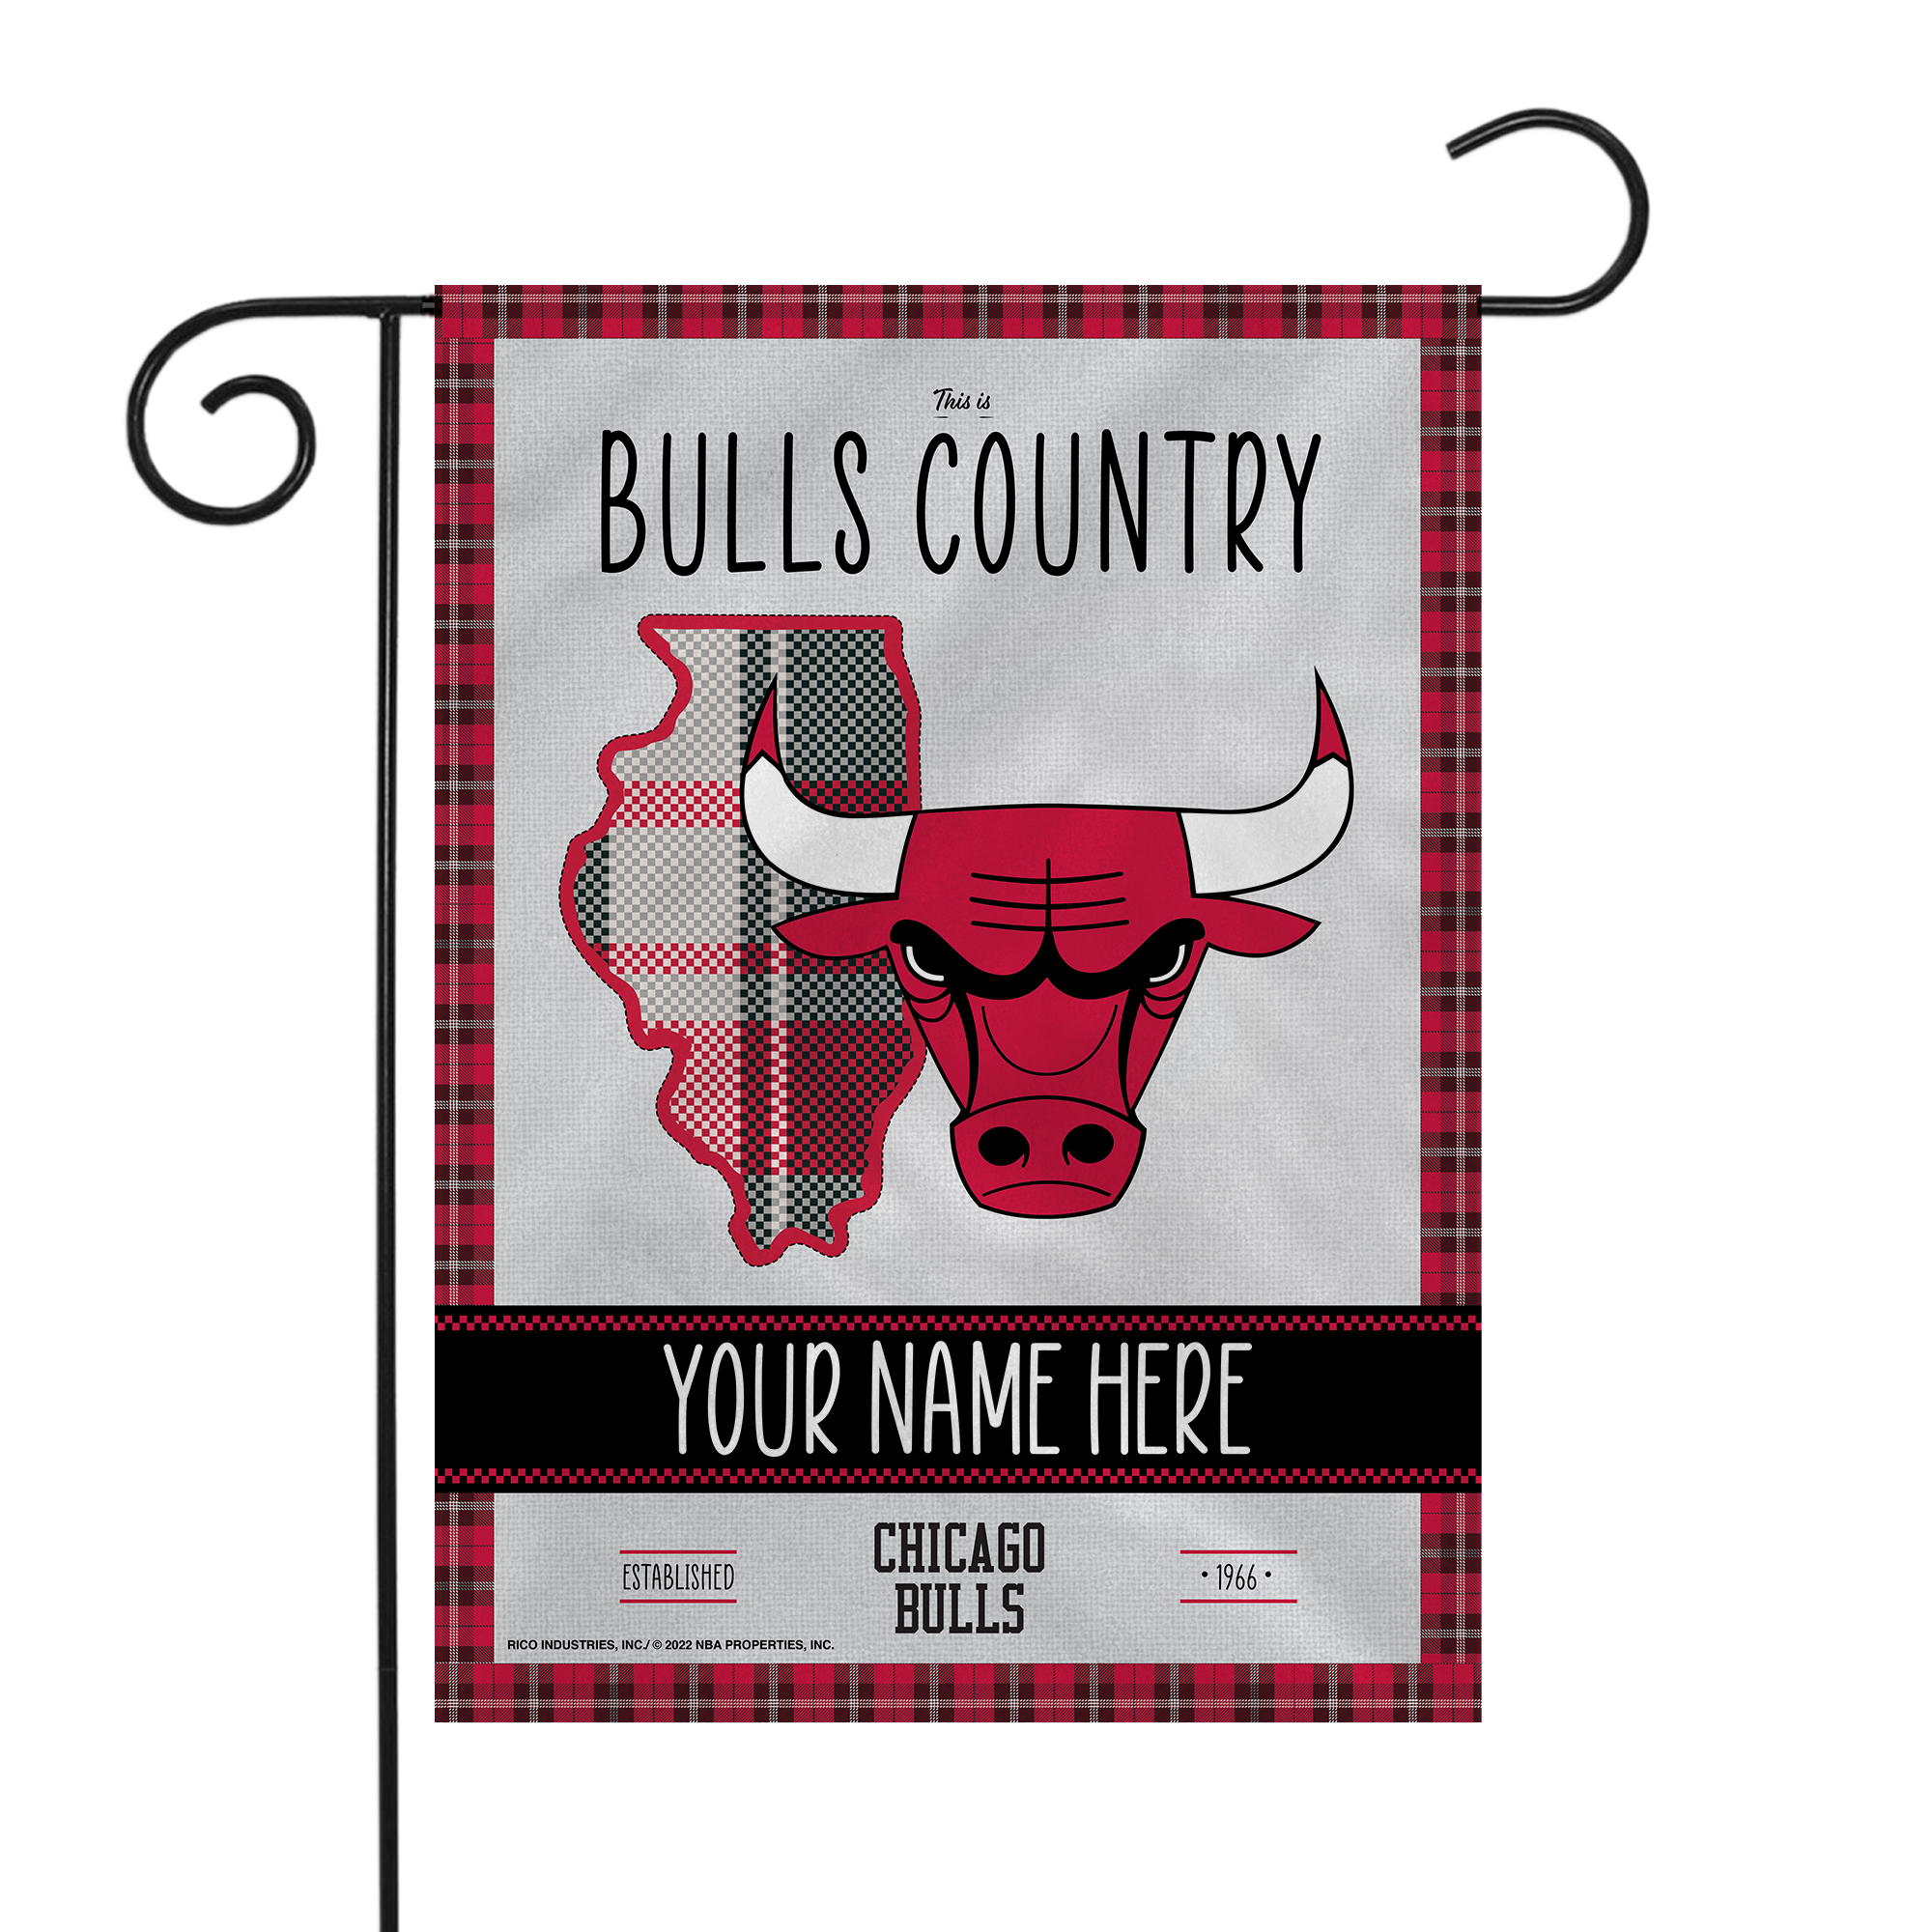 Rico Industries NBA Basketball Chicago Bulls This is Bulls Country - Plaid Design Personalized Garden Flag